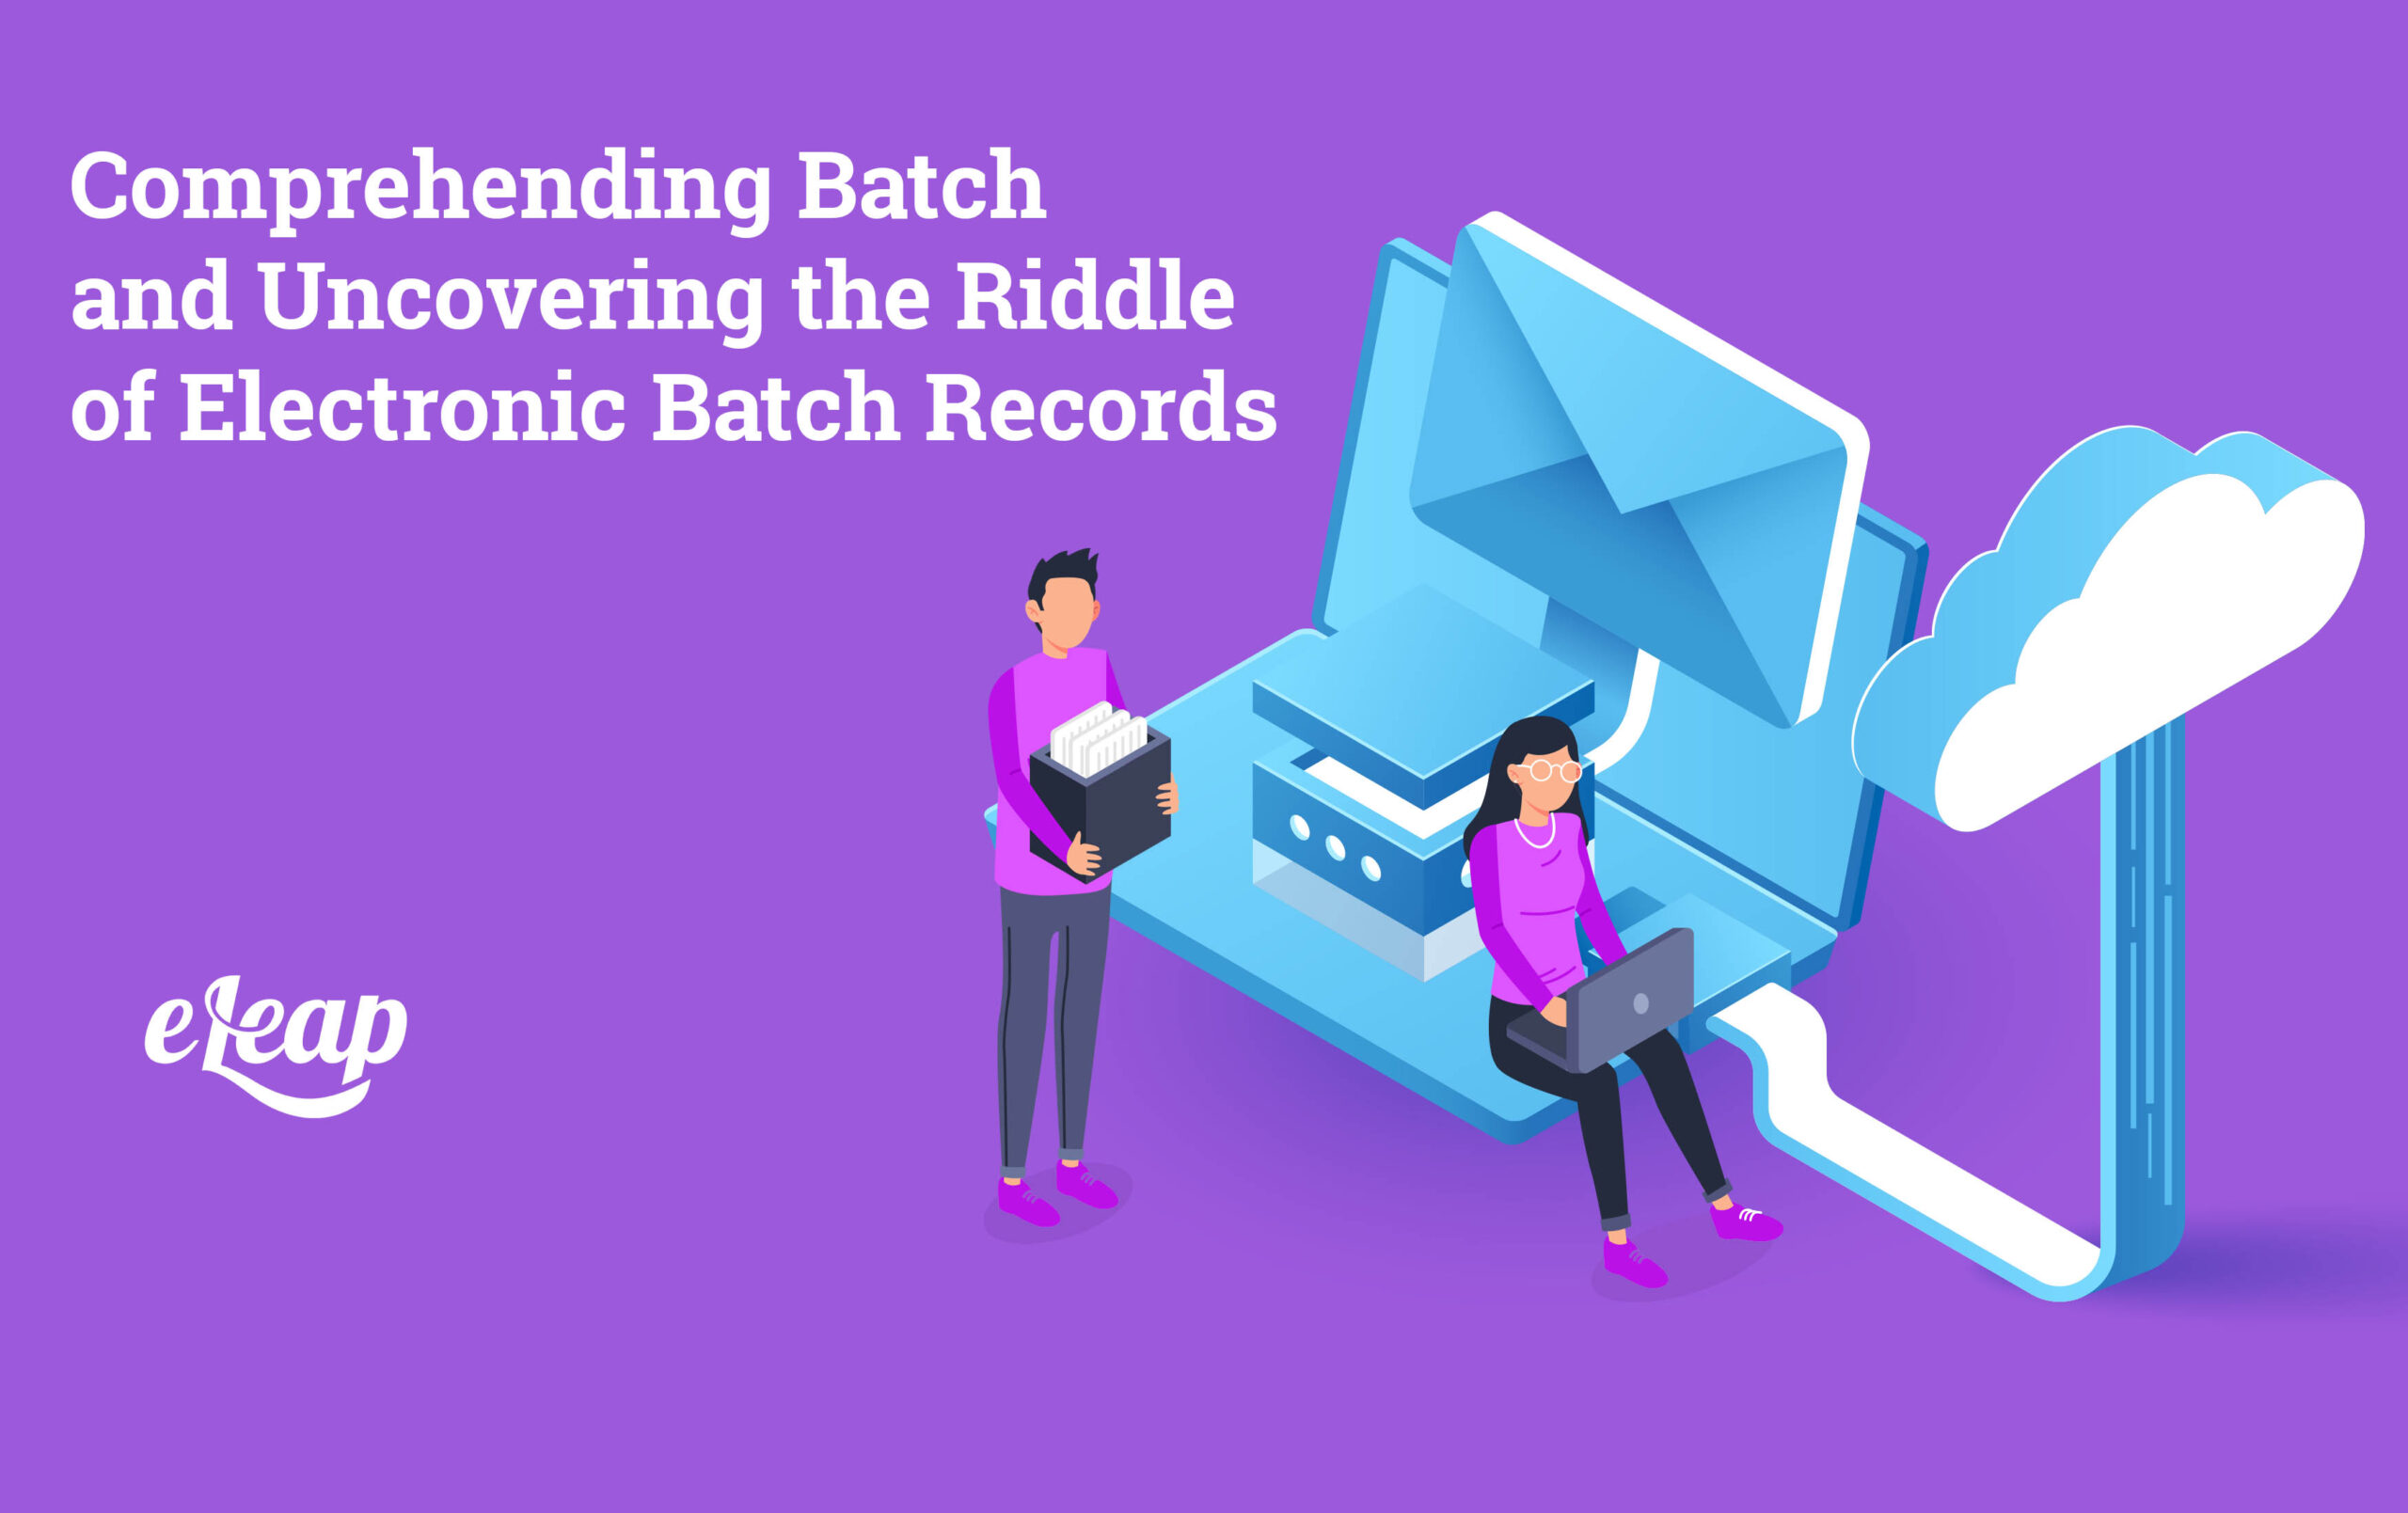 Electronic Batch Records